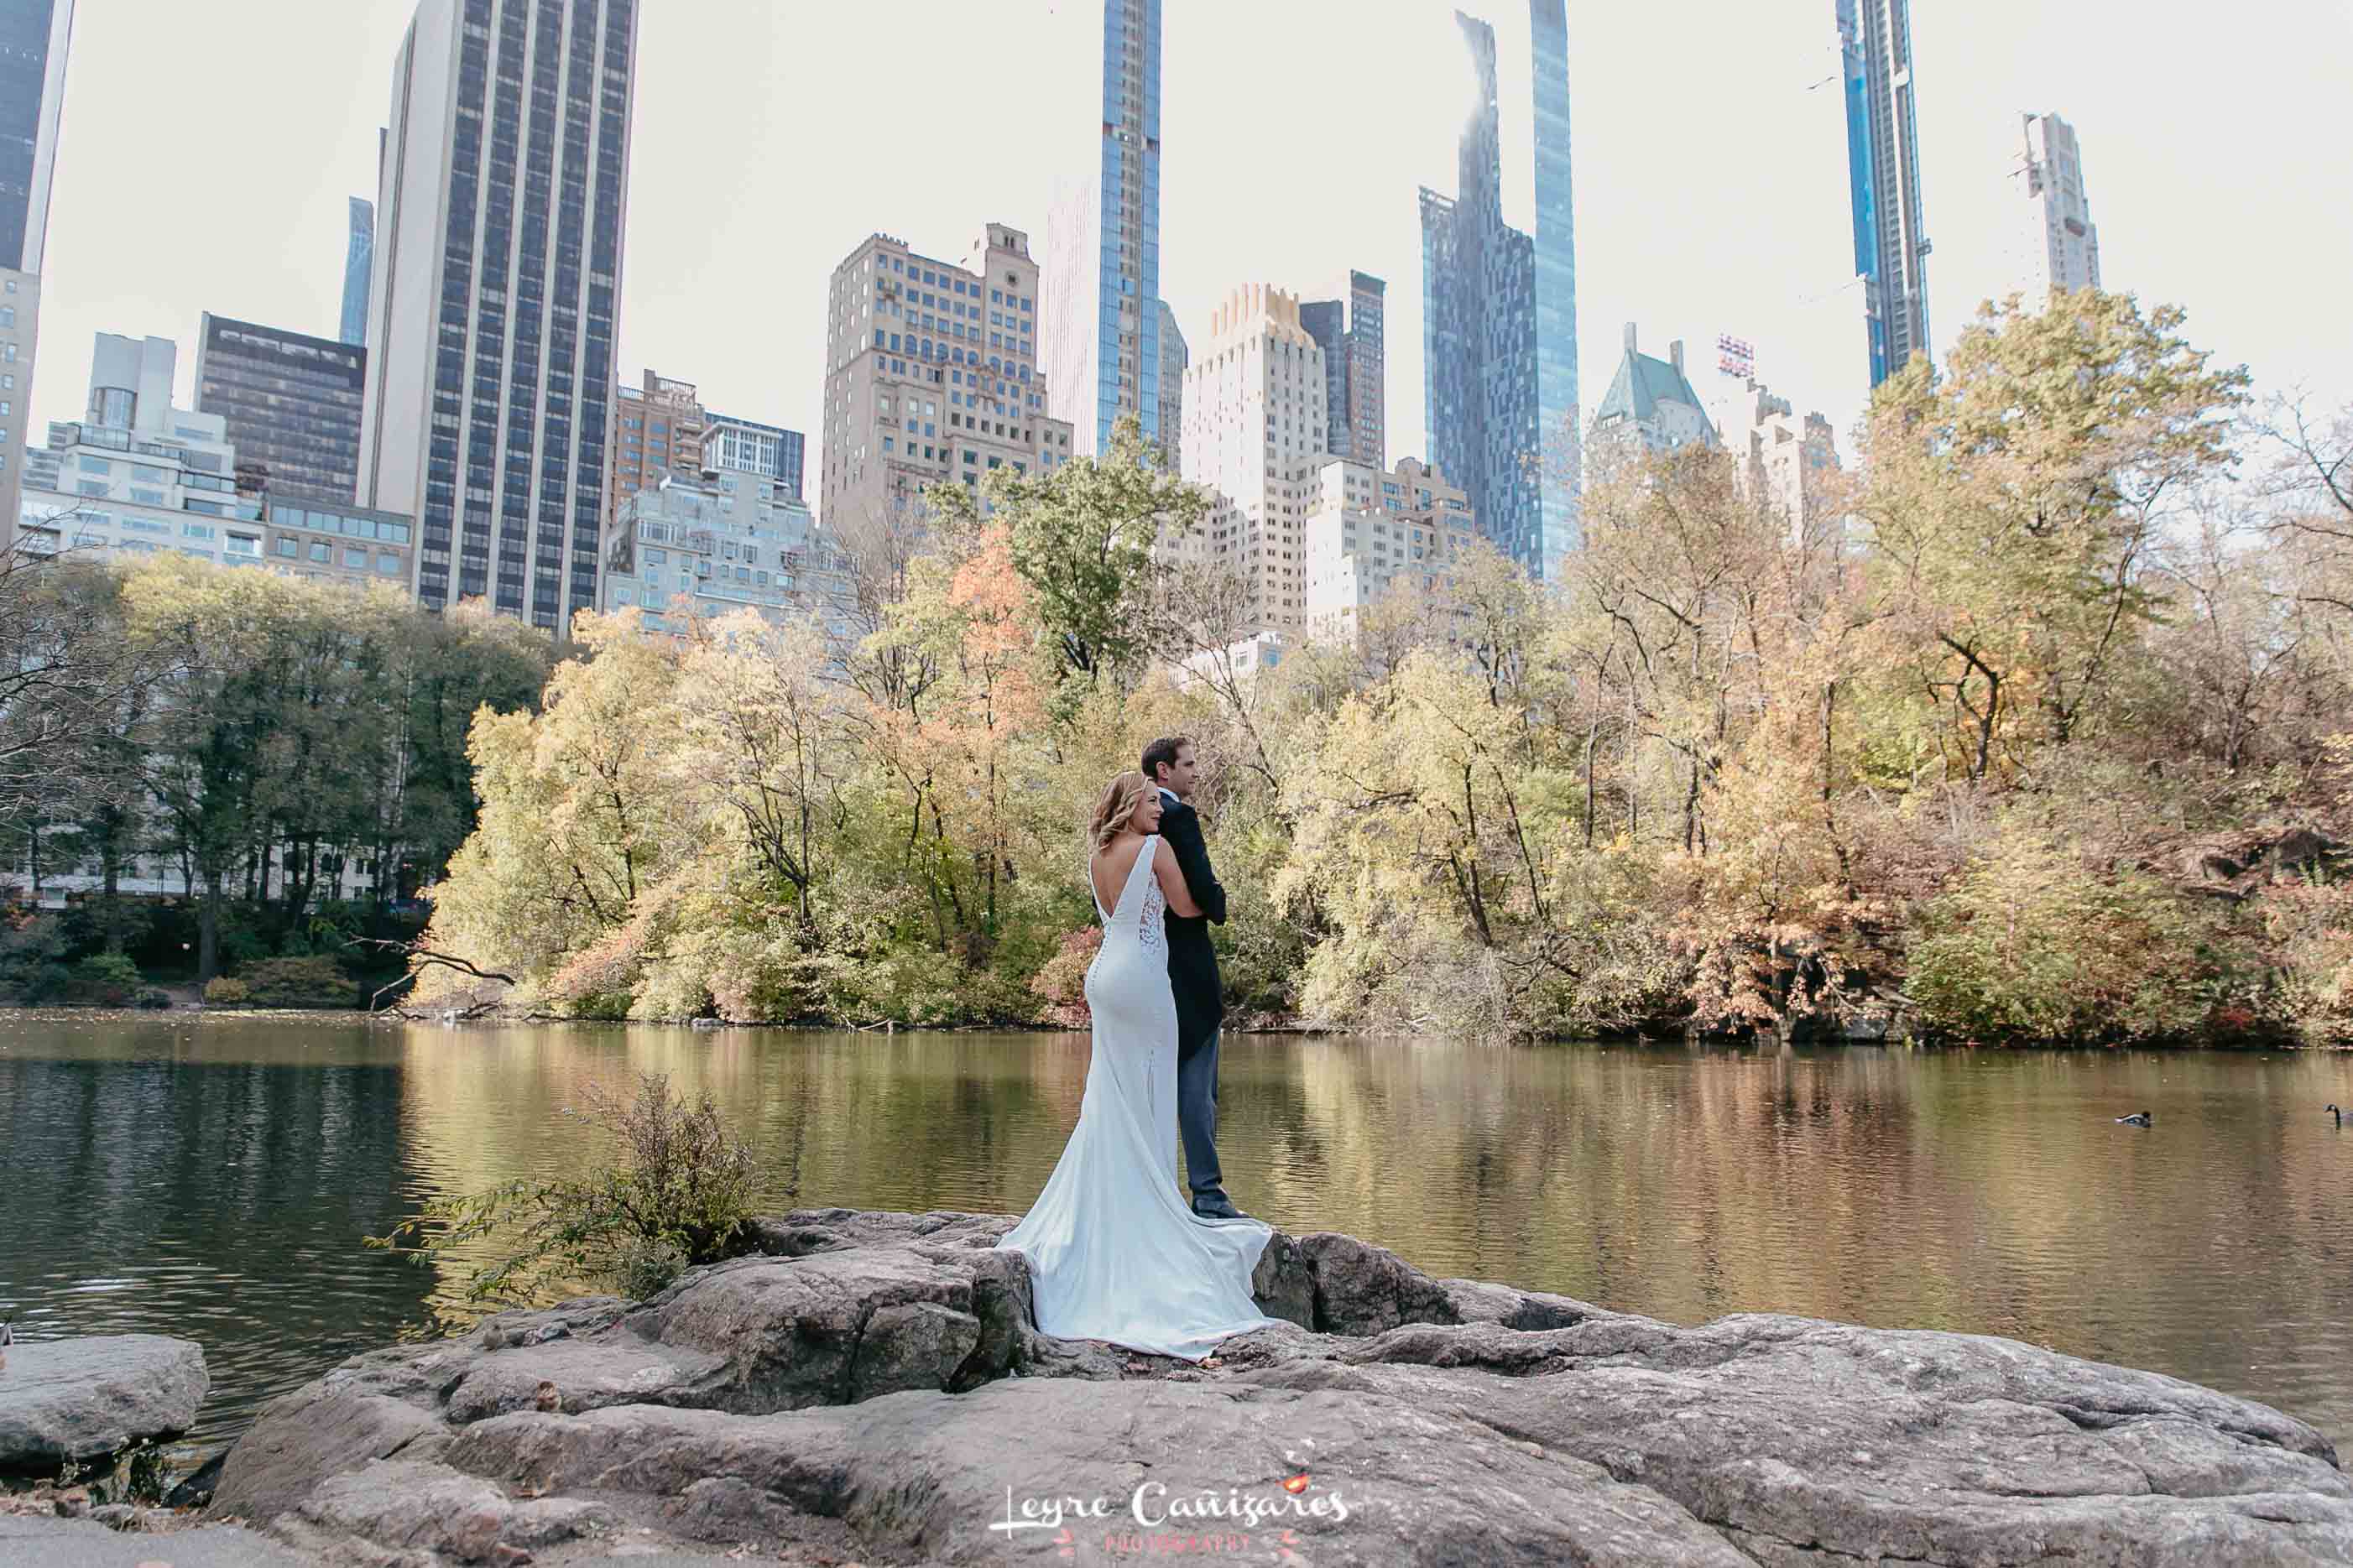 intimate elopement in central park, leyre cañizares as a photographer